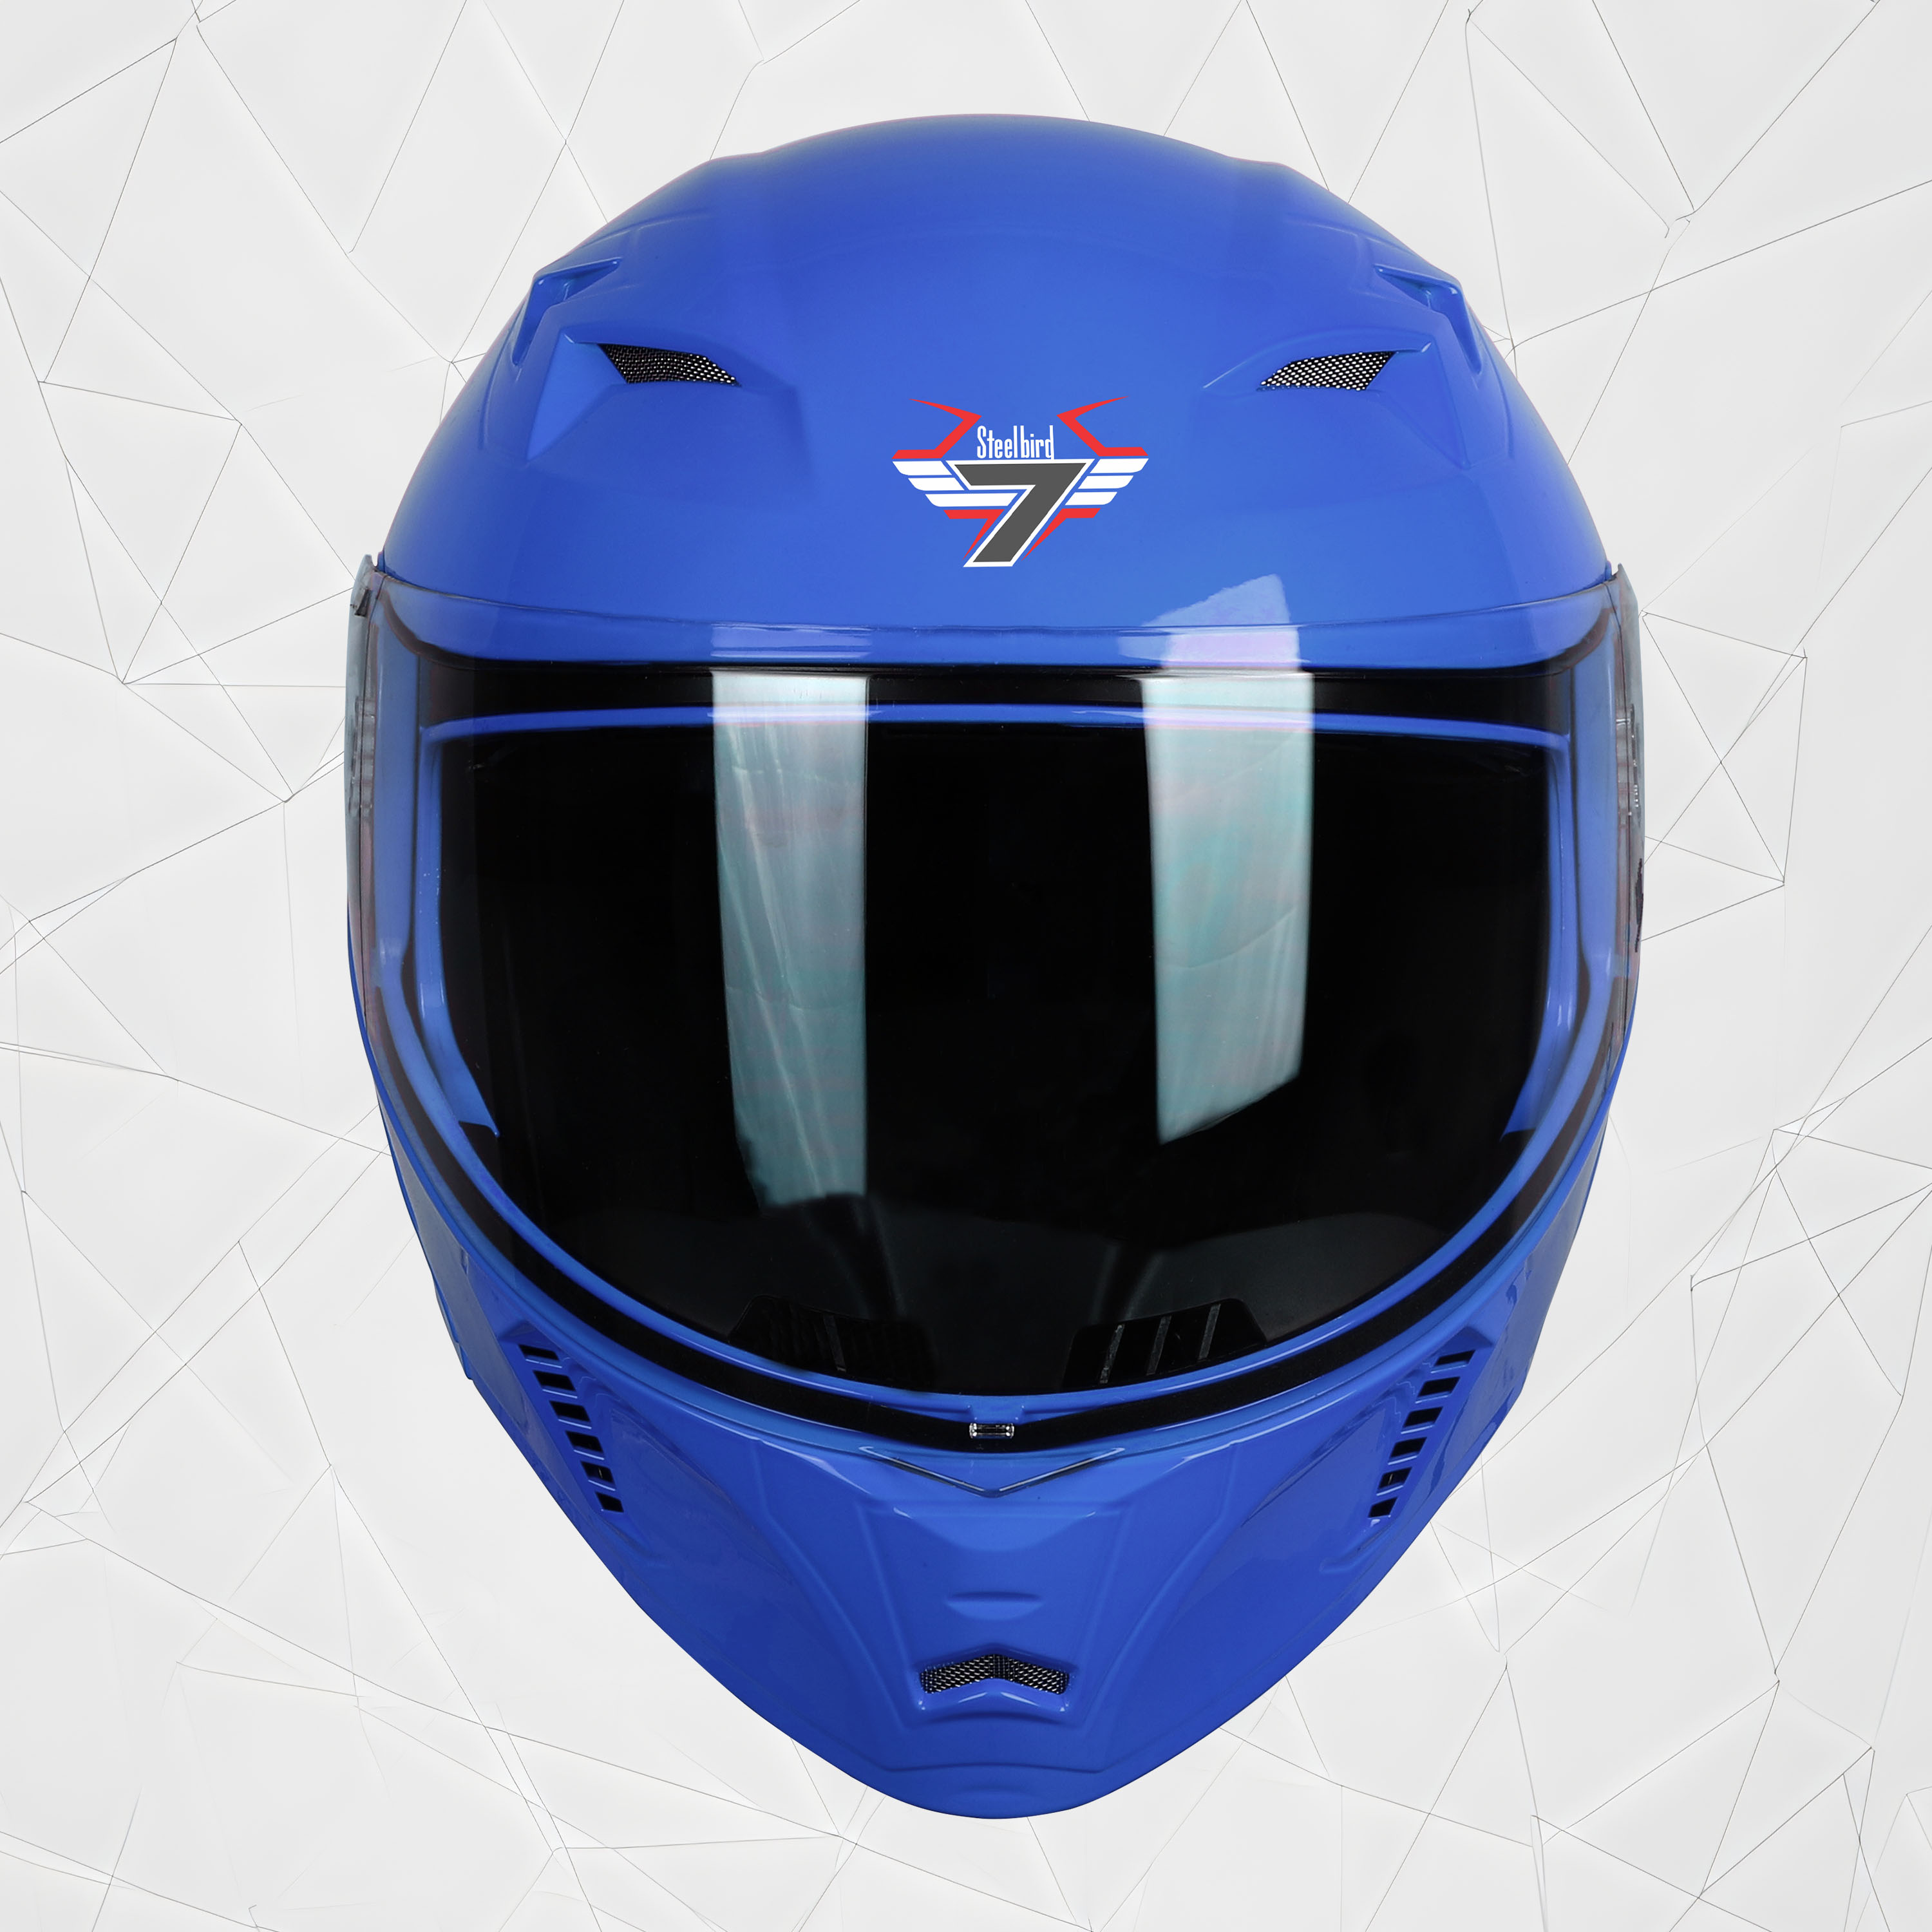 Steelbird SBA-20 7Wings ISI Certified Flip-Up Helmet With Black Spoiler For Men And Women (Glossy Y. Blue With Clear Visor)